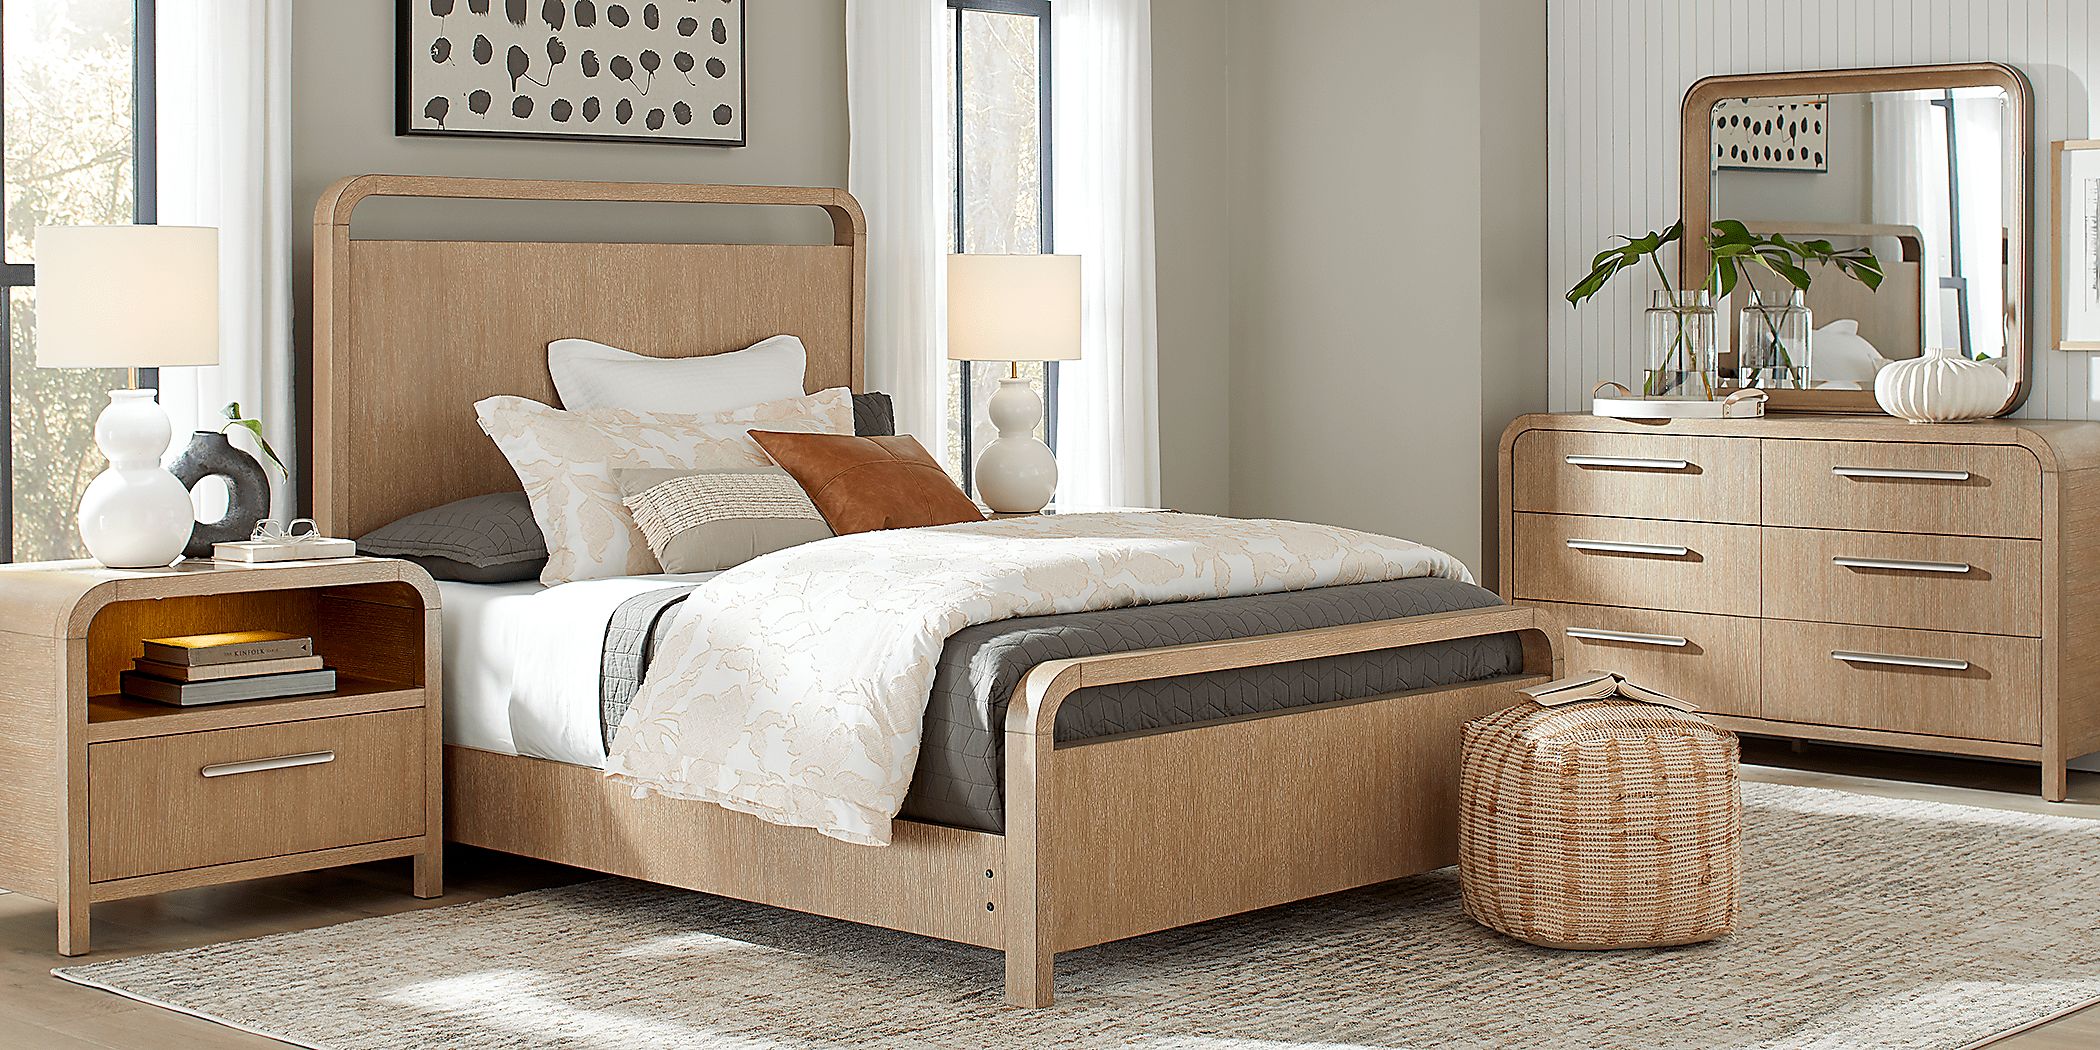 https://assets.roomstogo.com/product/canyon-beige-5-pc-queen-panel-bedroom_3213770P_image-room?cache-id=39c7c42be2e1259dd8ef713423119d06